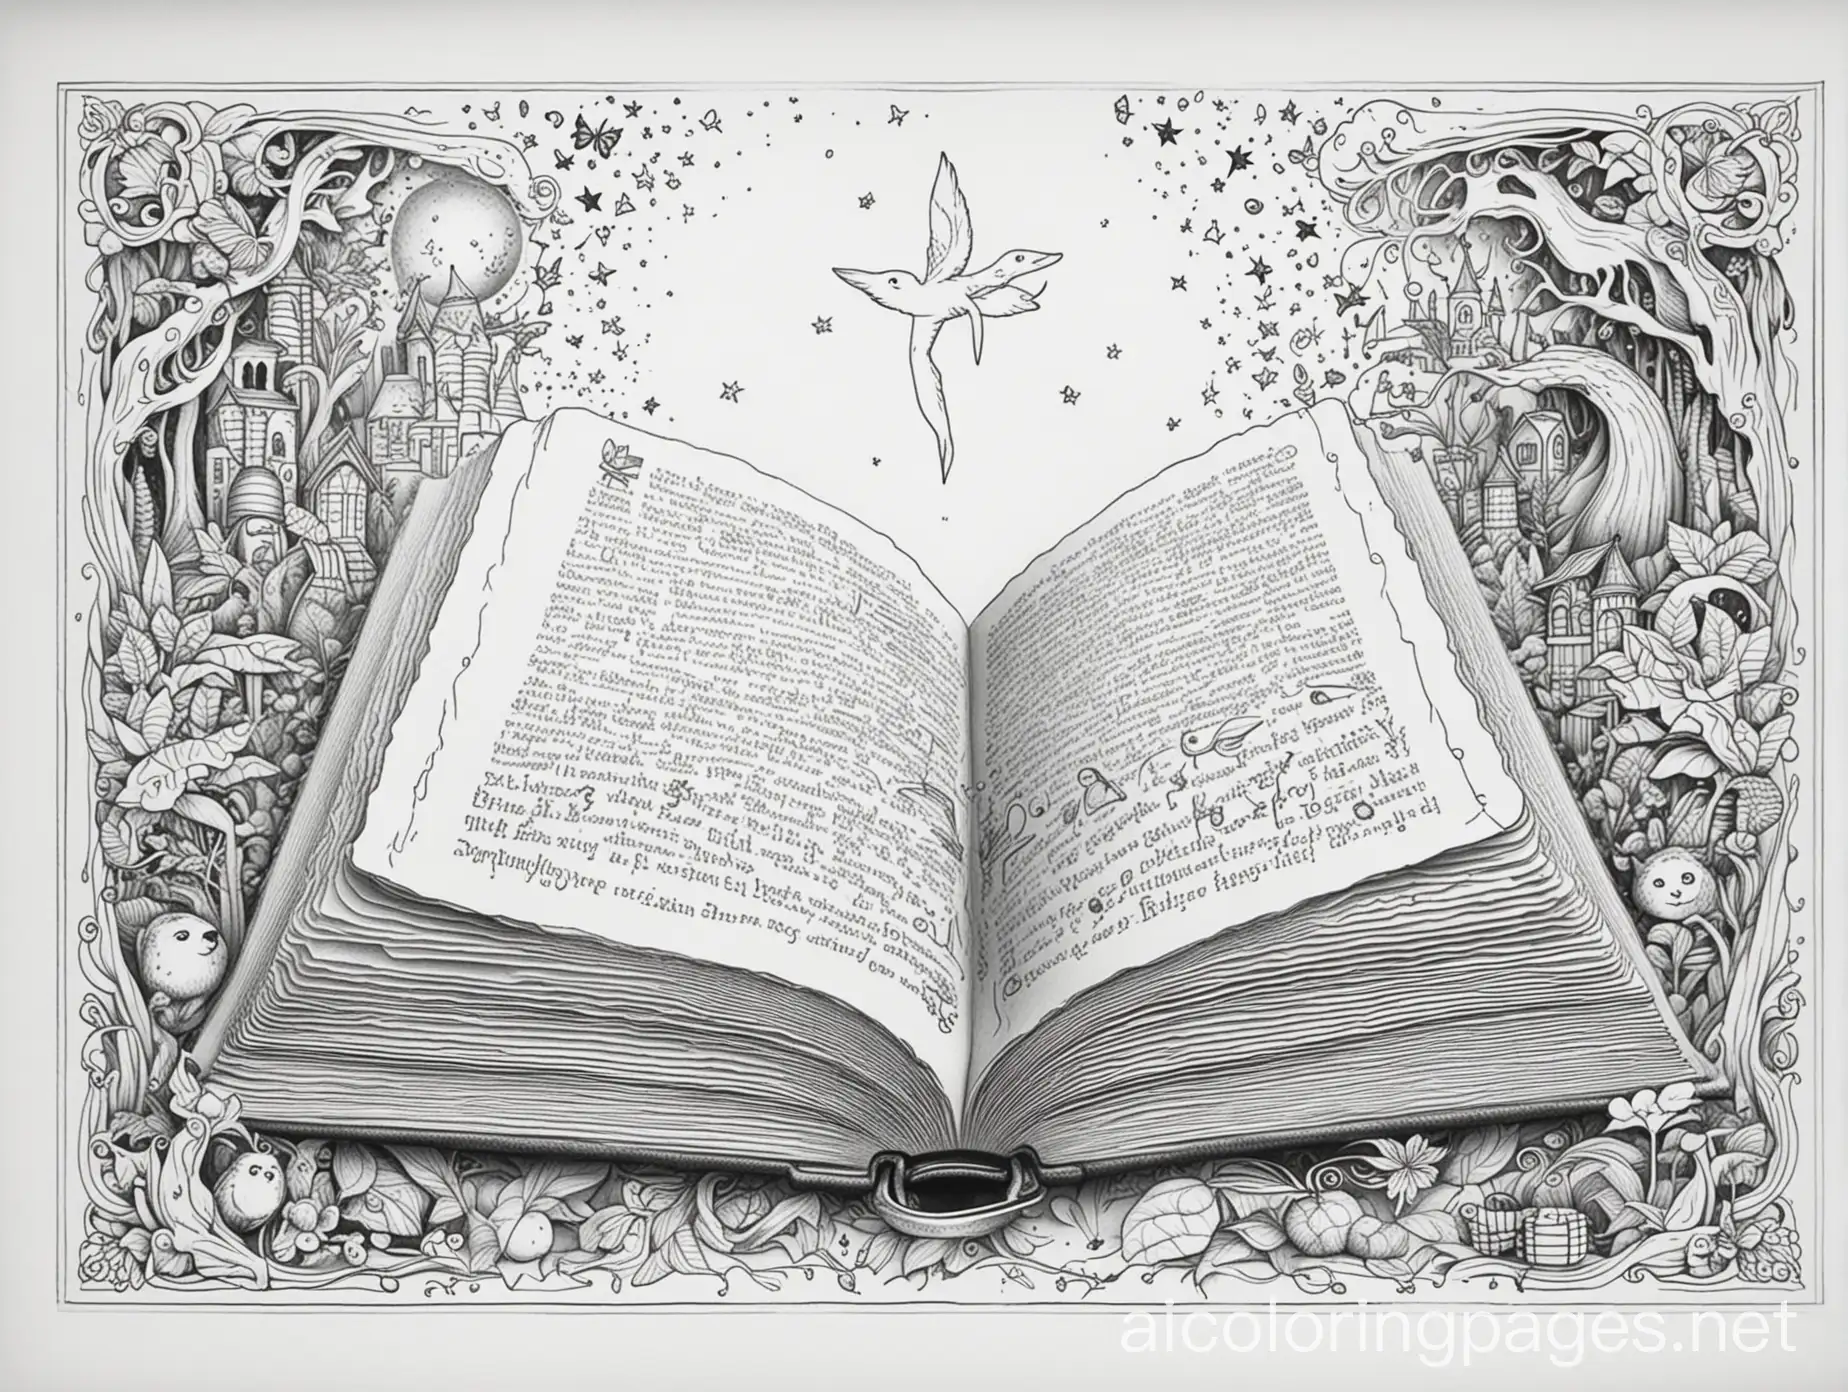 Mystical books, Coloring Page, black and white, line art, white background, Simplicity, Ample White Space. The background of the coloring page is plain white to make it easy for young children to color within the lines. The outlines of all the subjects are easy to distinguish, making it simple for kids to color without too much difficulty